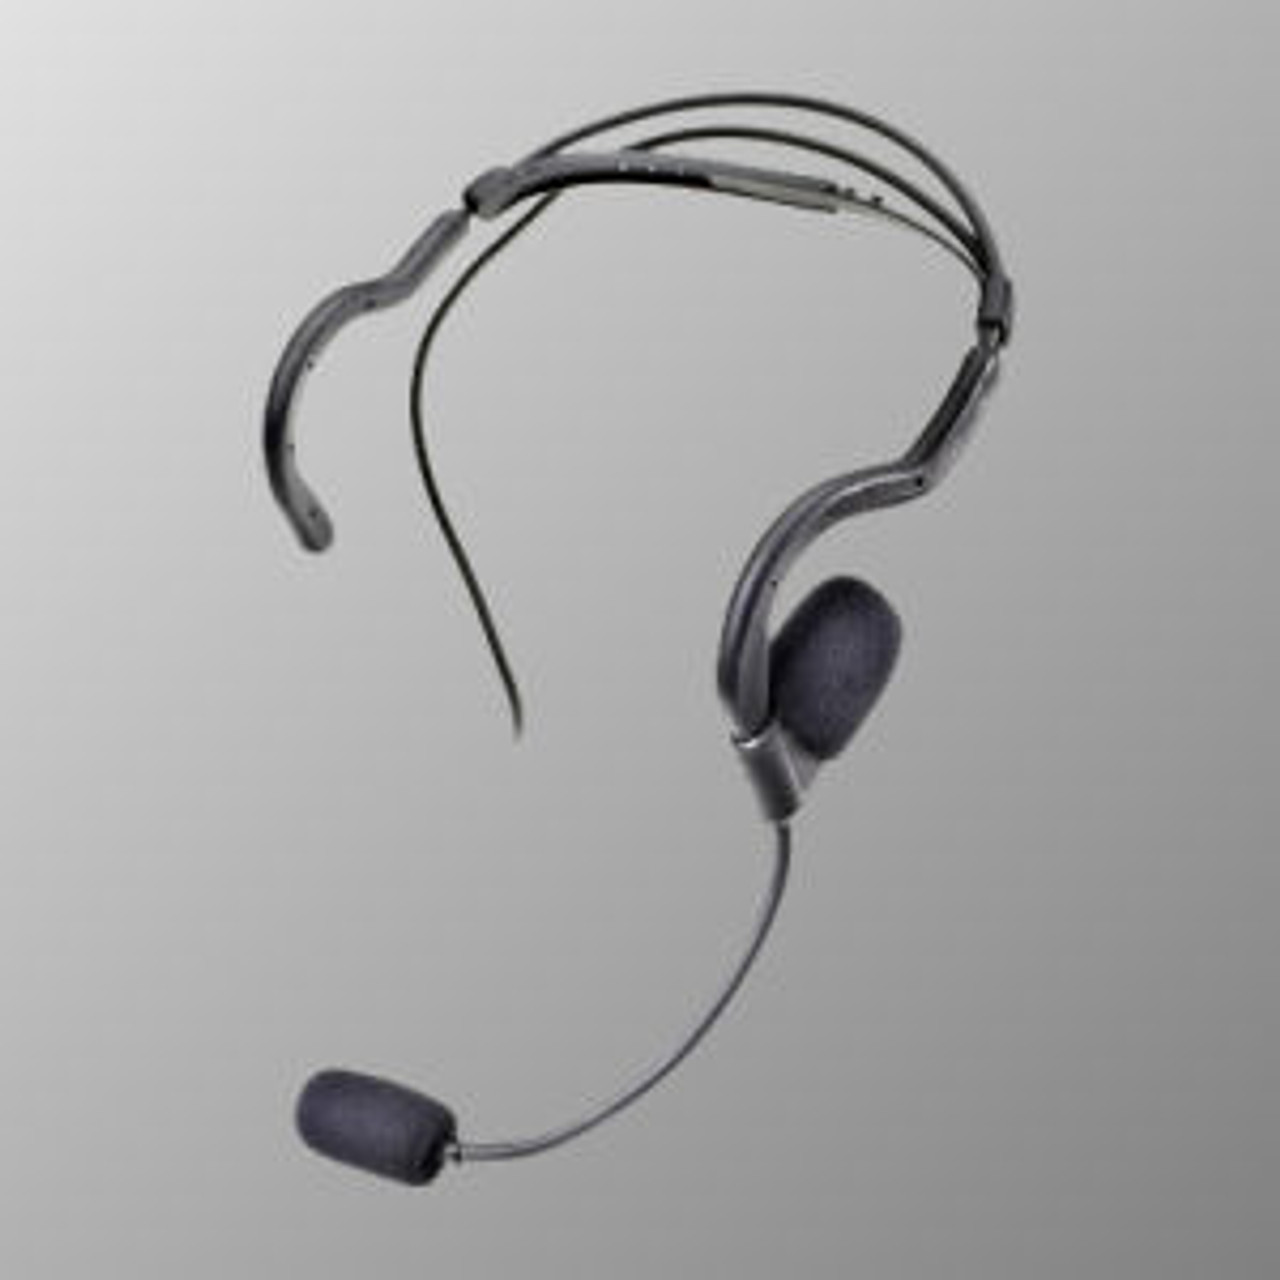 EF Johnson 5100 Series Tactical Noise Canceling Single Muff Headset